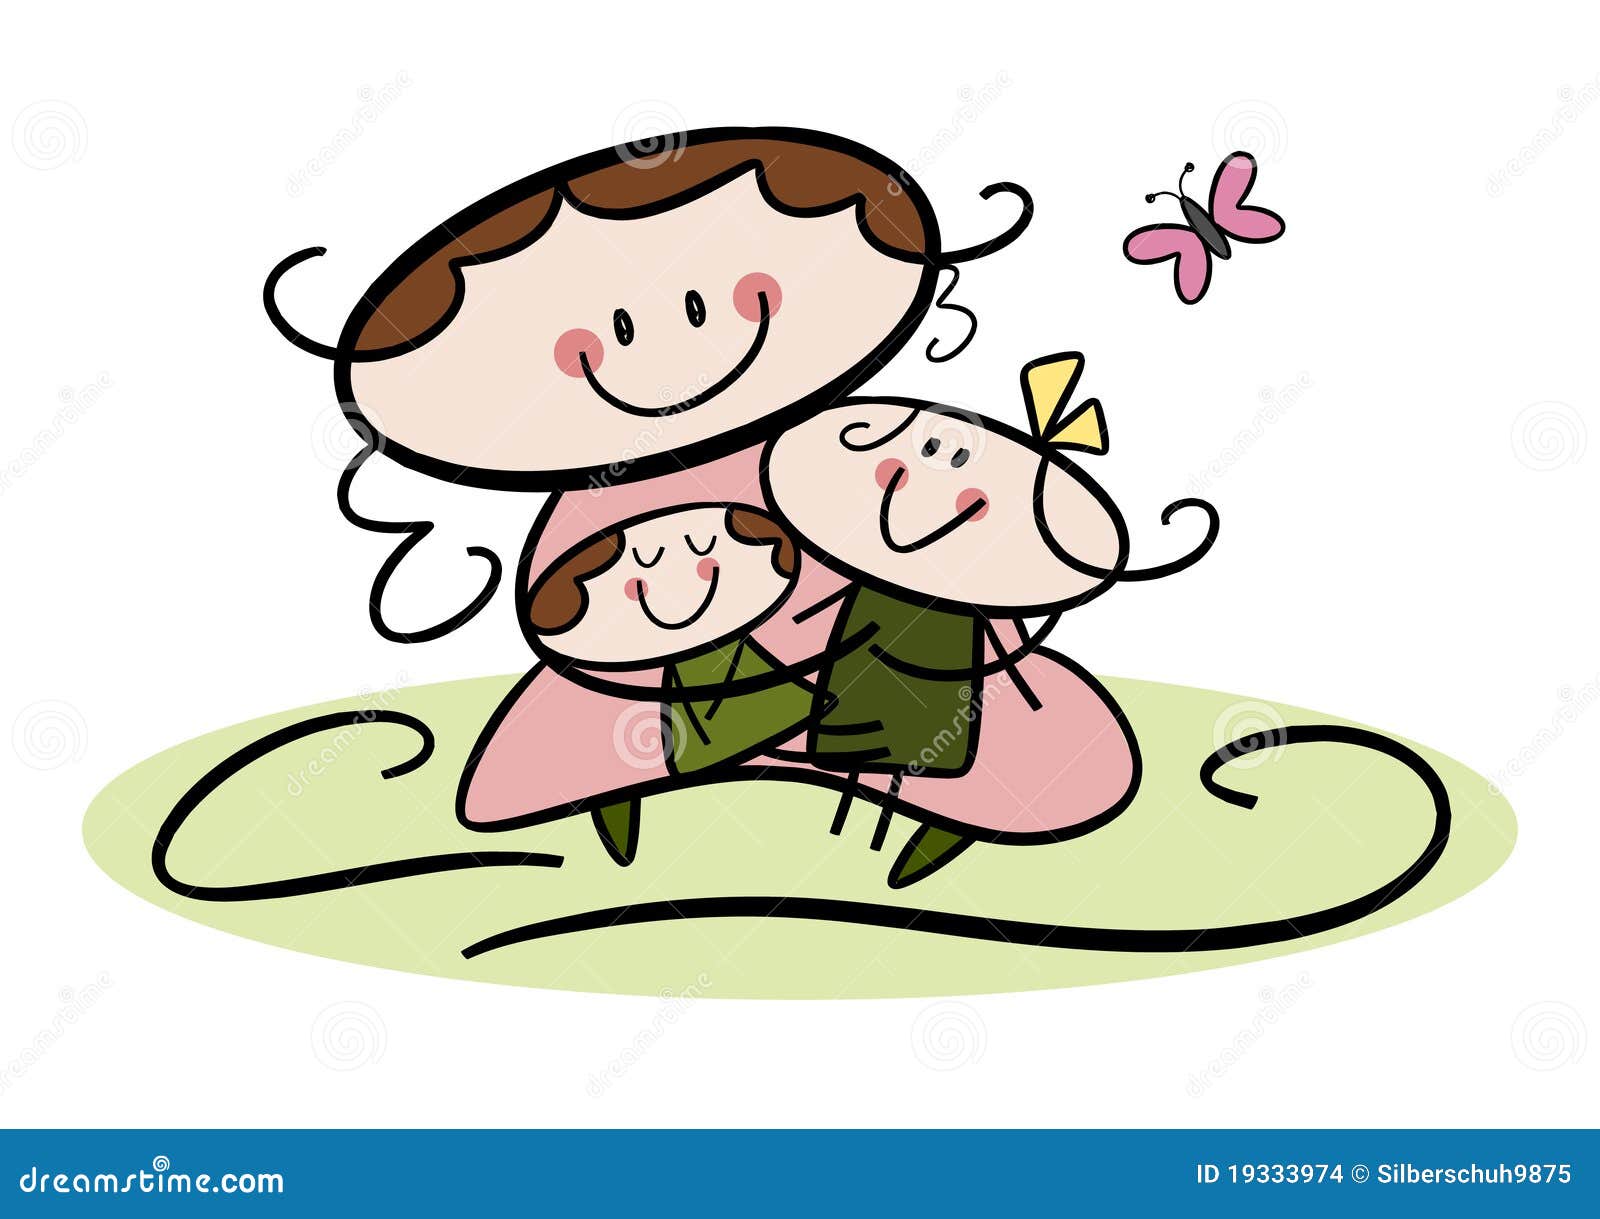 Happy Mother s Day! stock vector. Illustration of love - 19333974